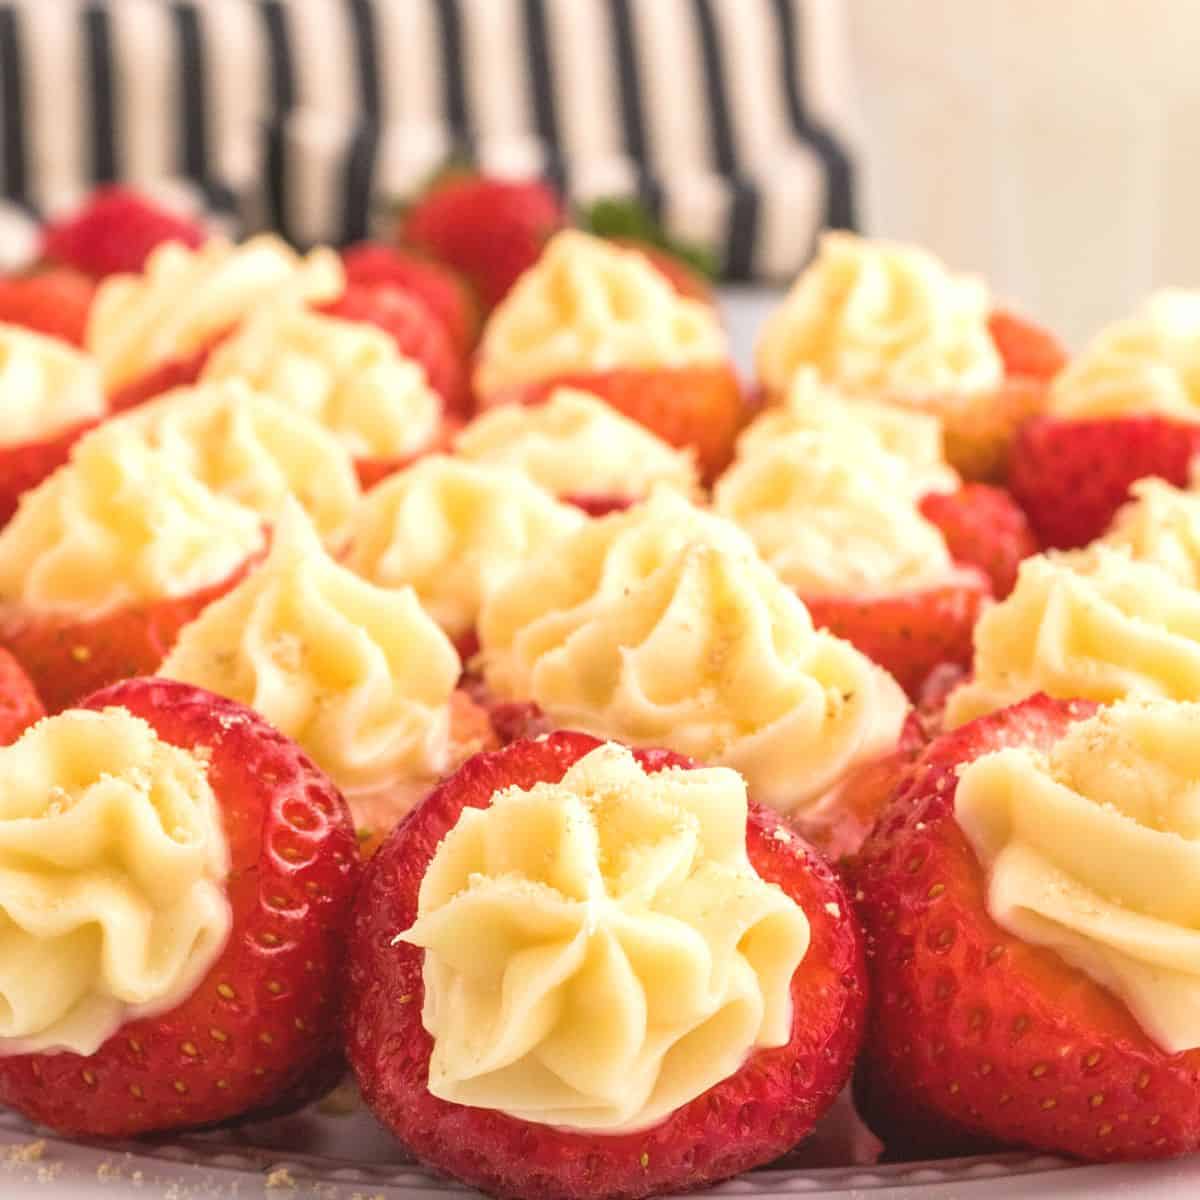 No Added Sugar Cheesecake Stuffed Strawberries, a quick and easy no bake dessert or snack recipe made with no added sugar